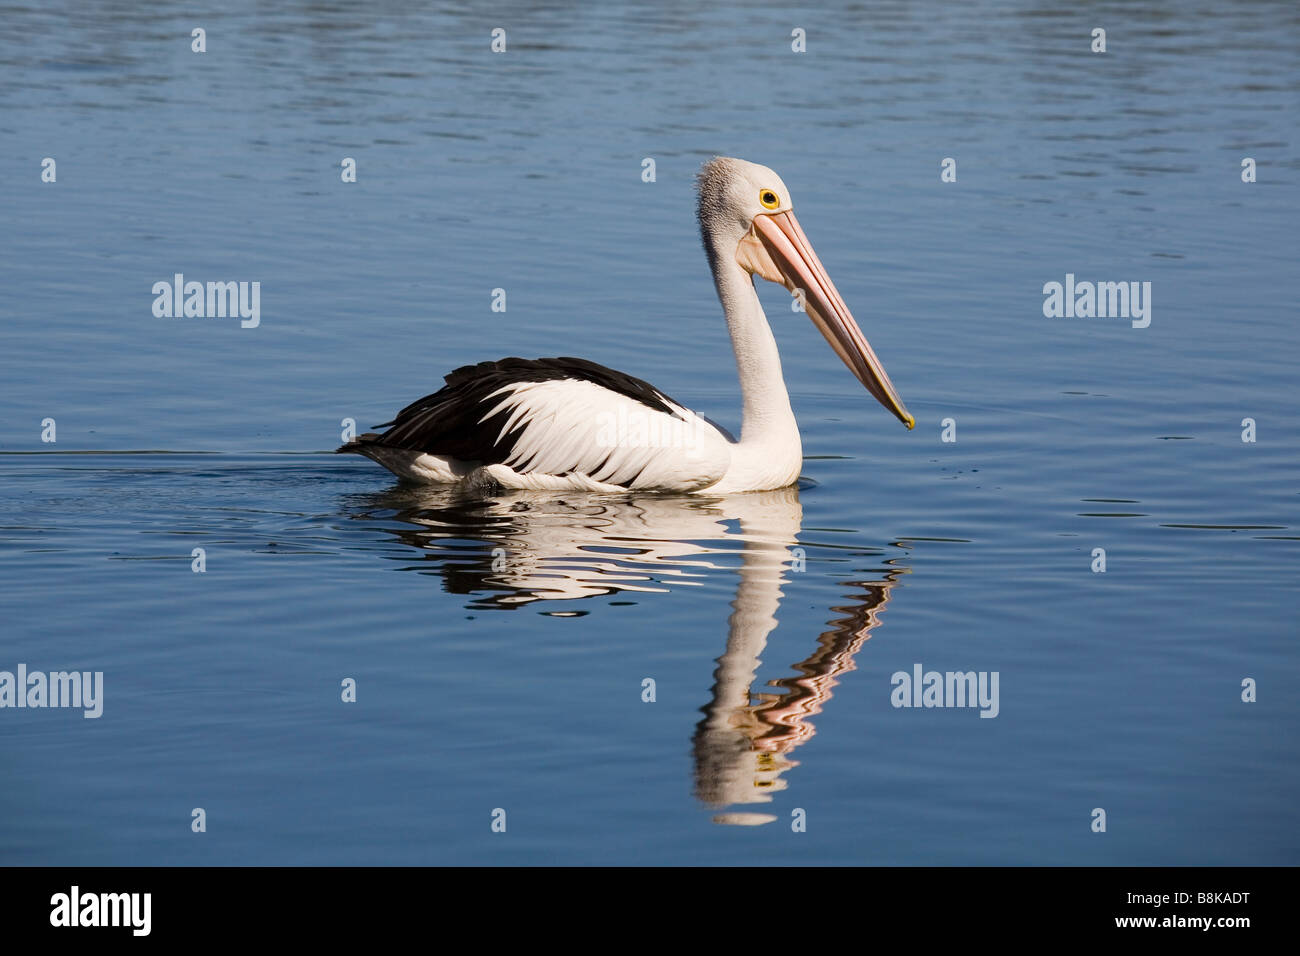 Pelican and reflection in an Australian lake Stock Photo